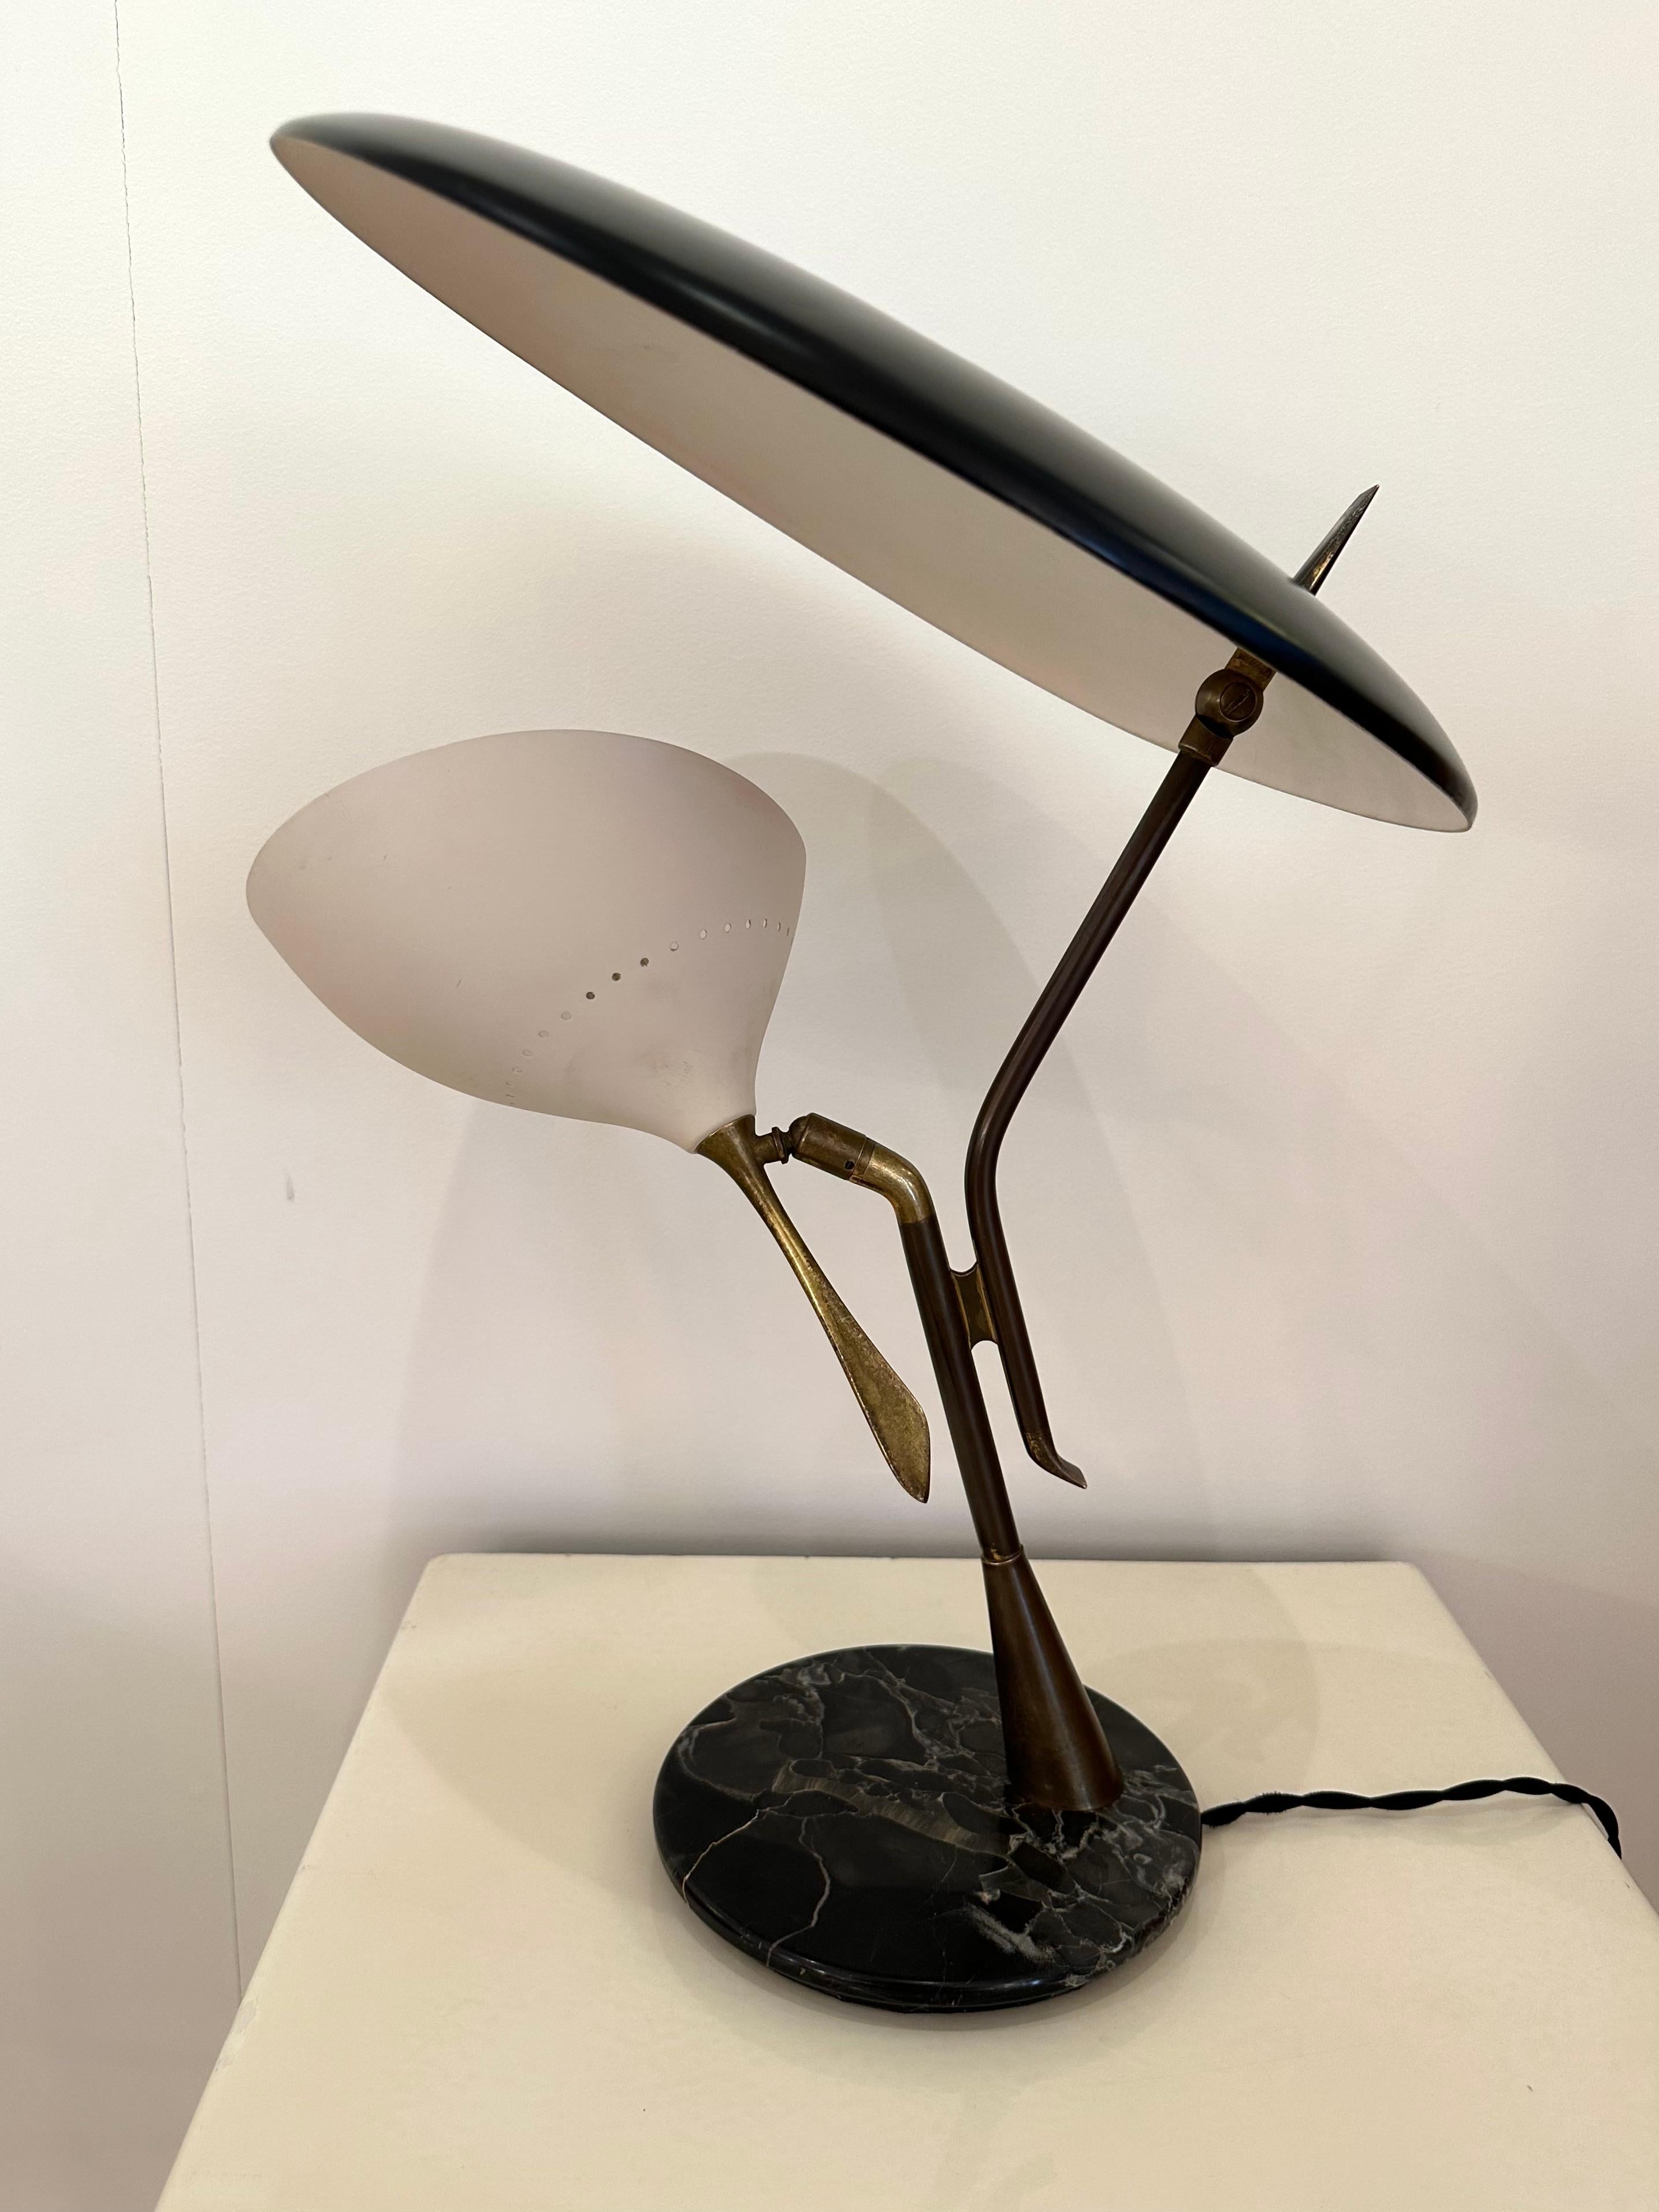 Midcentury Desk Lamp Painted Metal, Brass, Marble by Lumen, Italy, 1950s For Sale 1